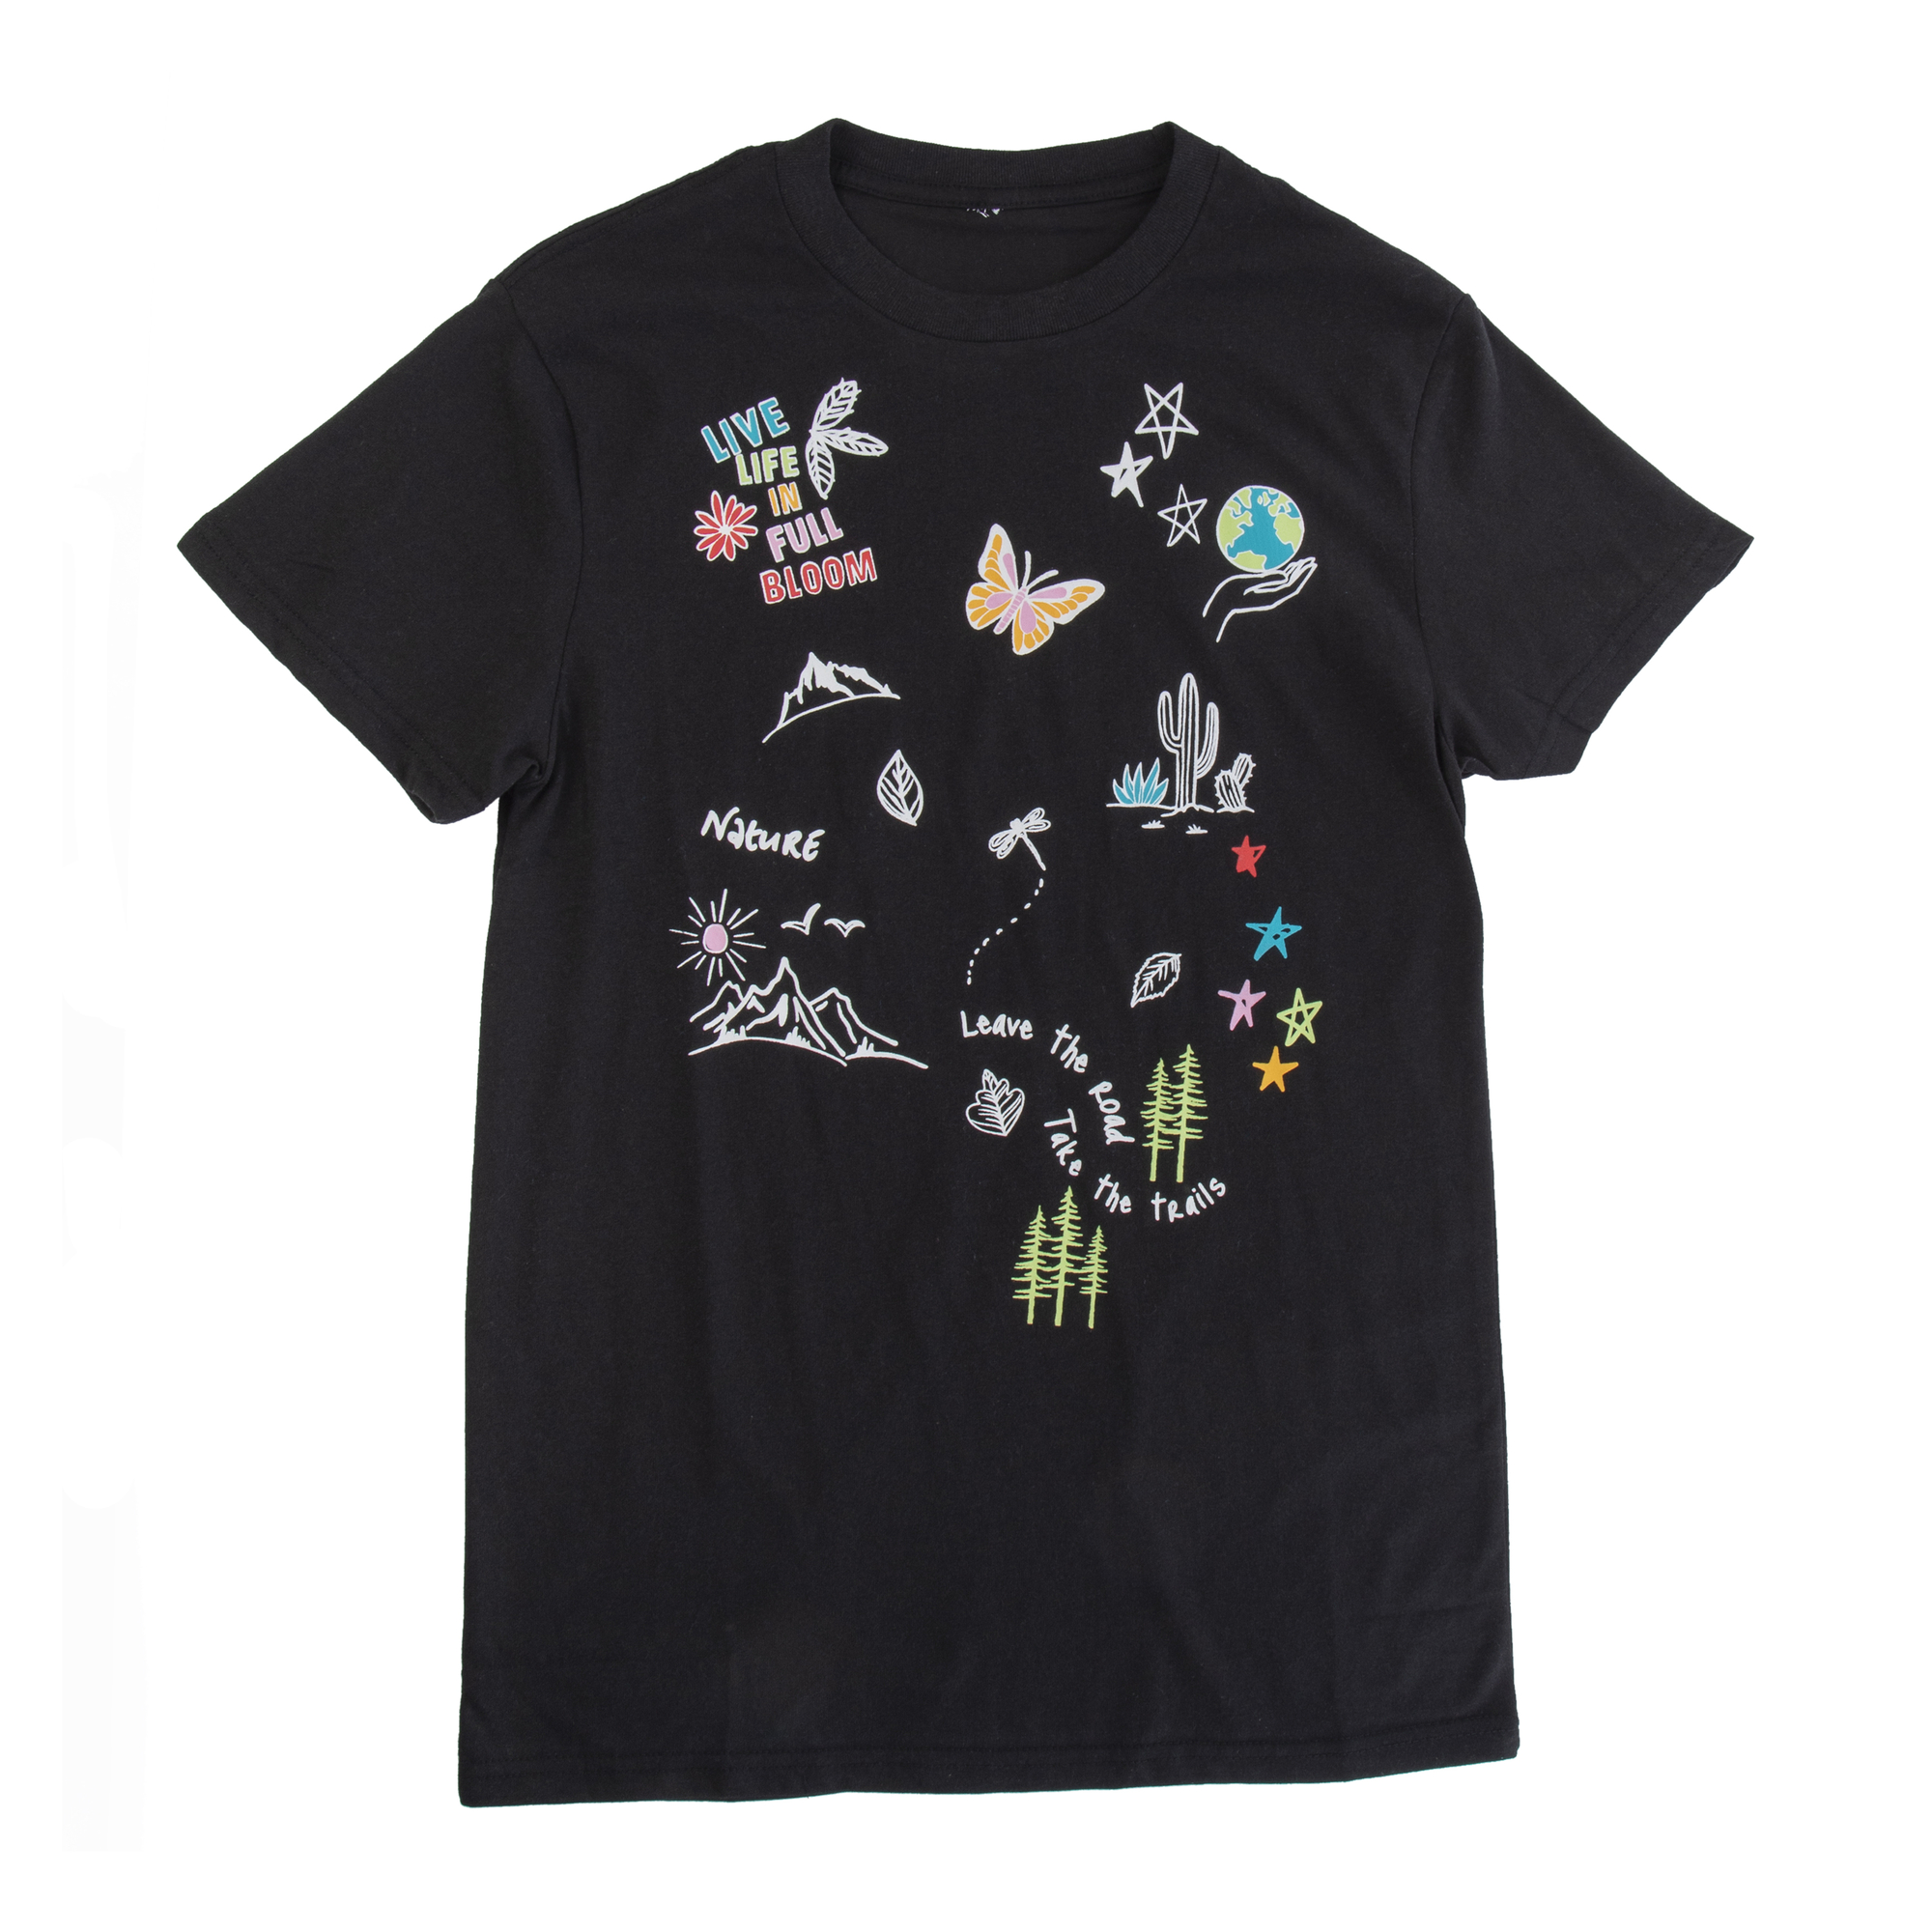 take the trails' graphic tee